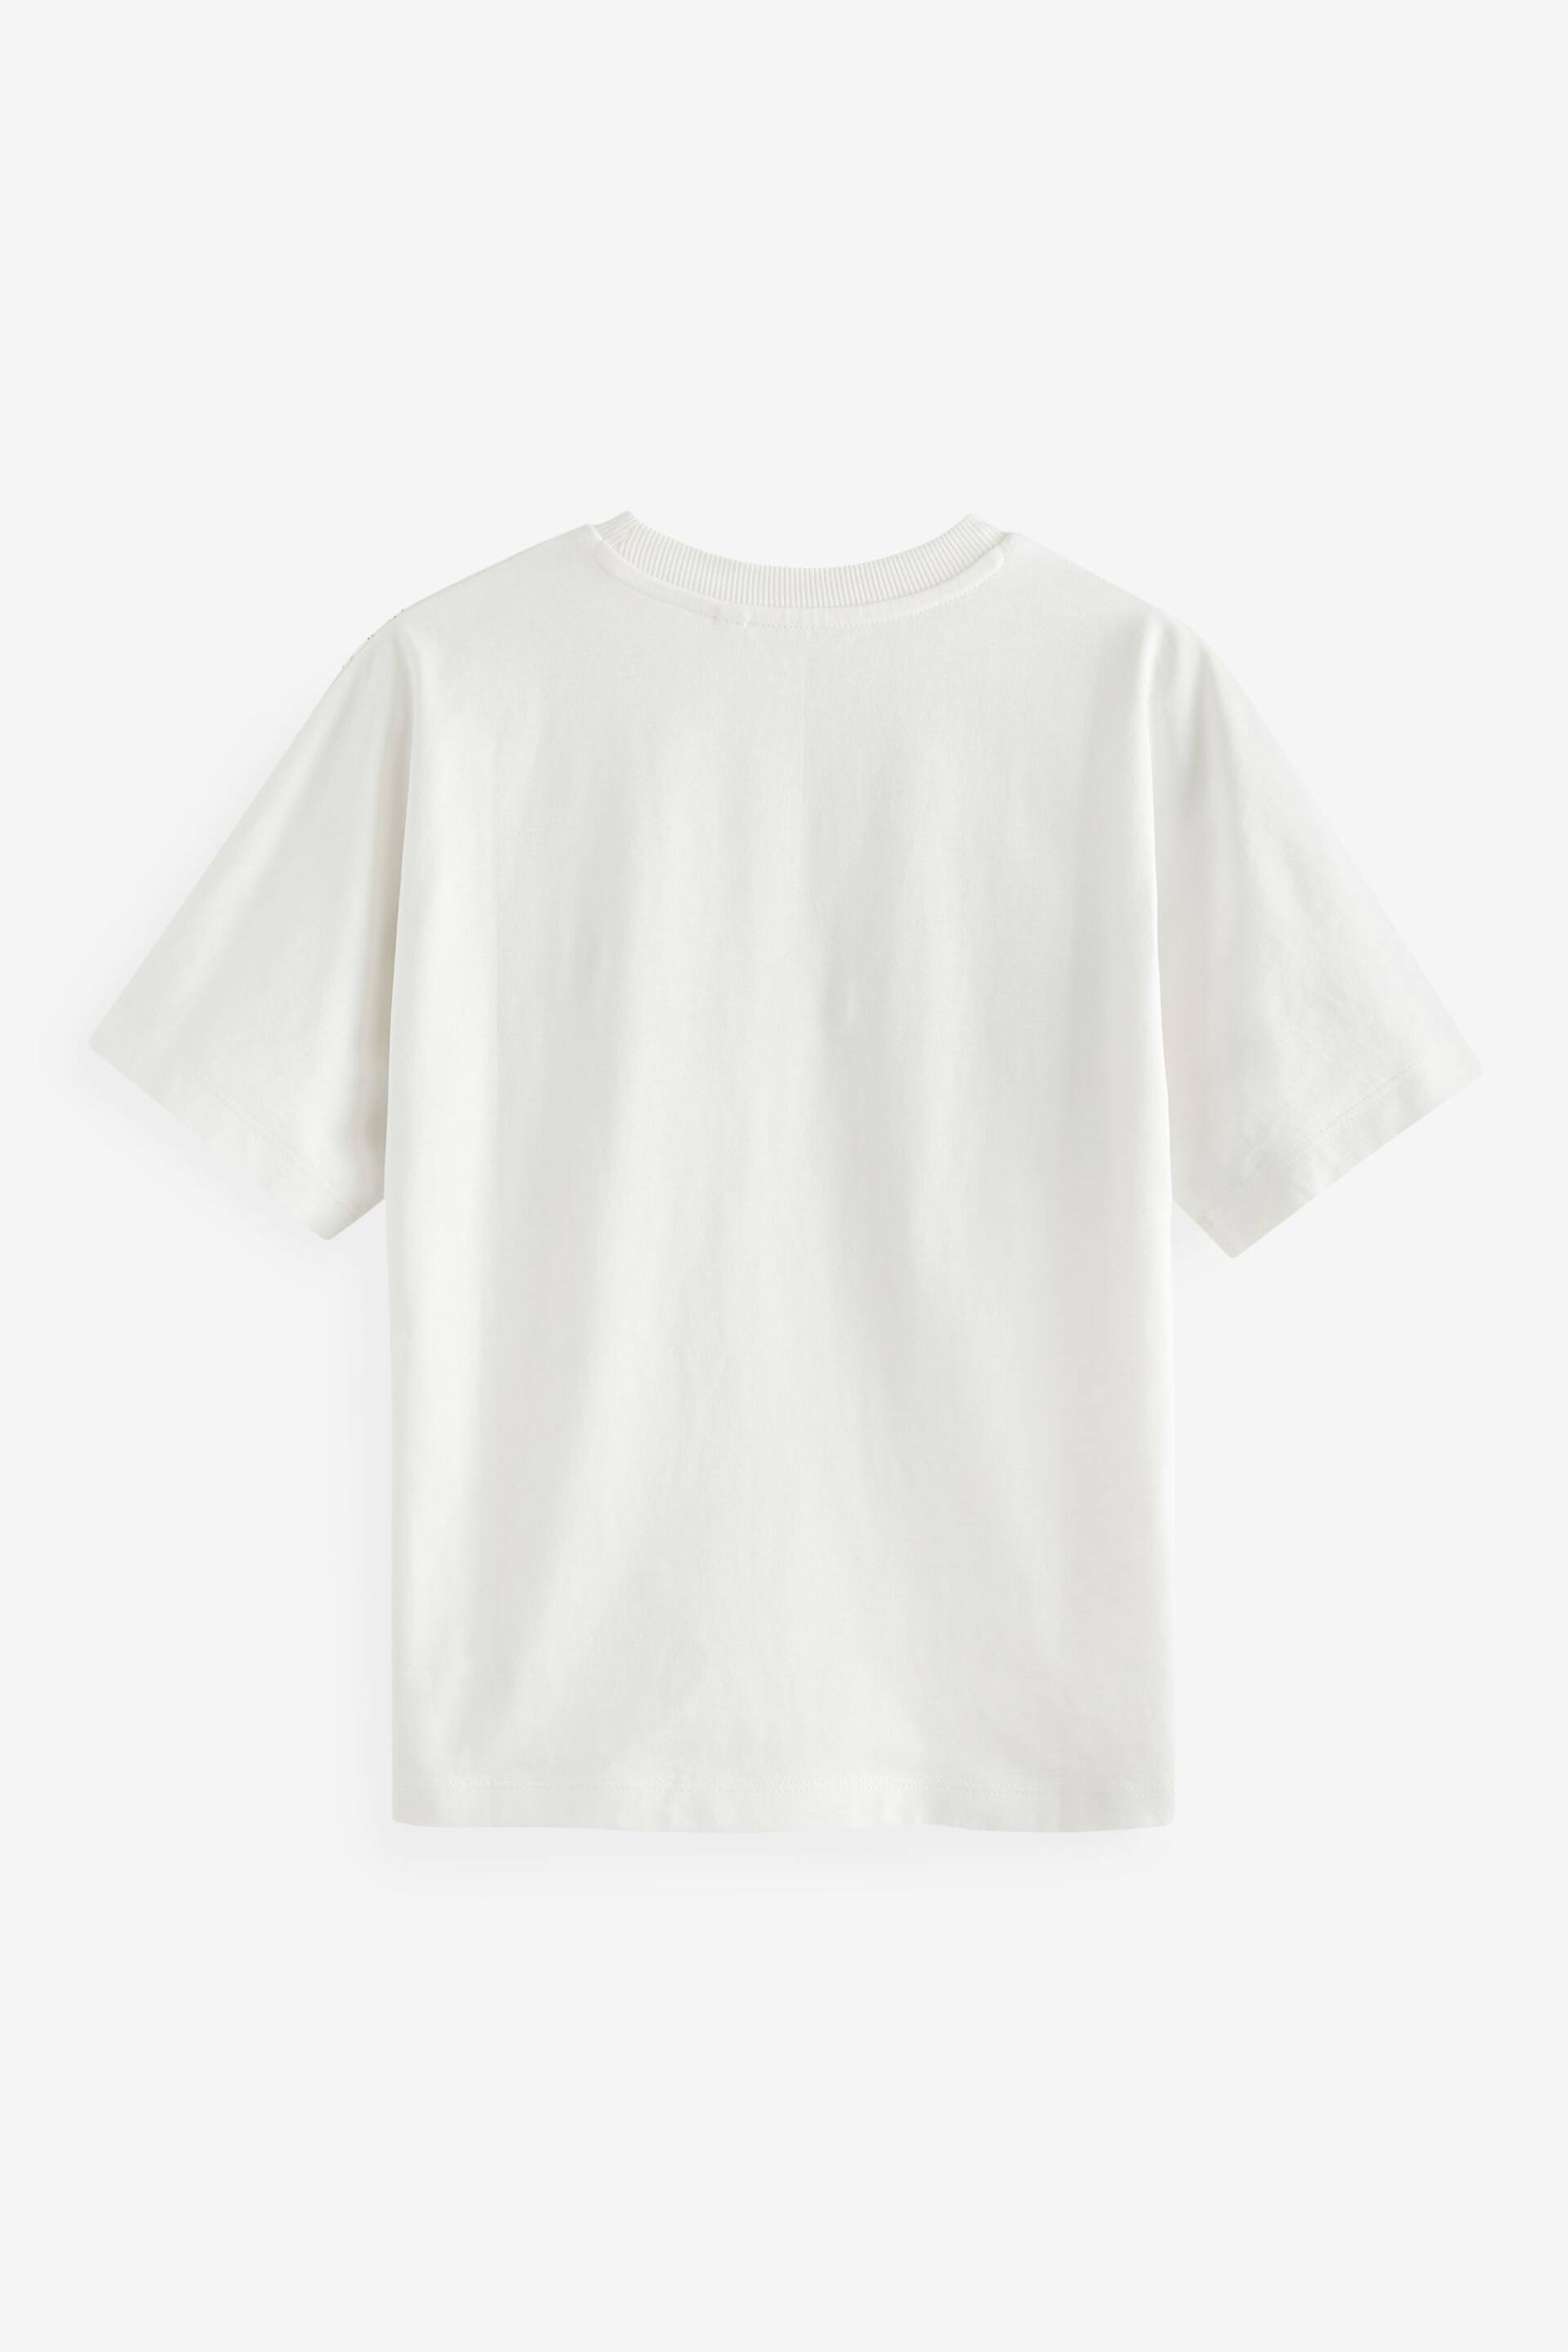 White Cool Vibes Relaxed Fit Short Sleeve Graphic T-Shirt (3-16yrs) - Image 2 of 4